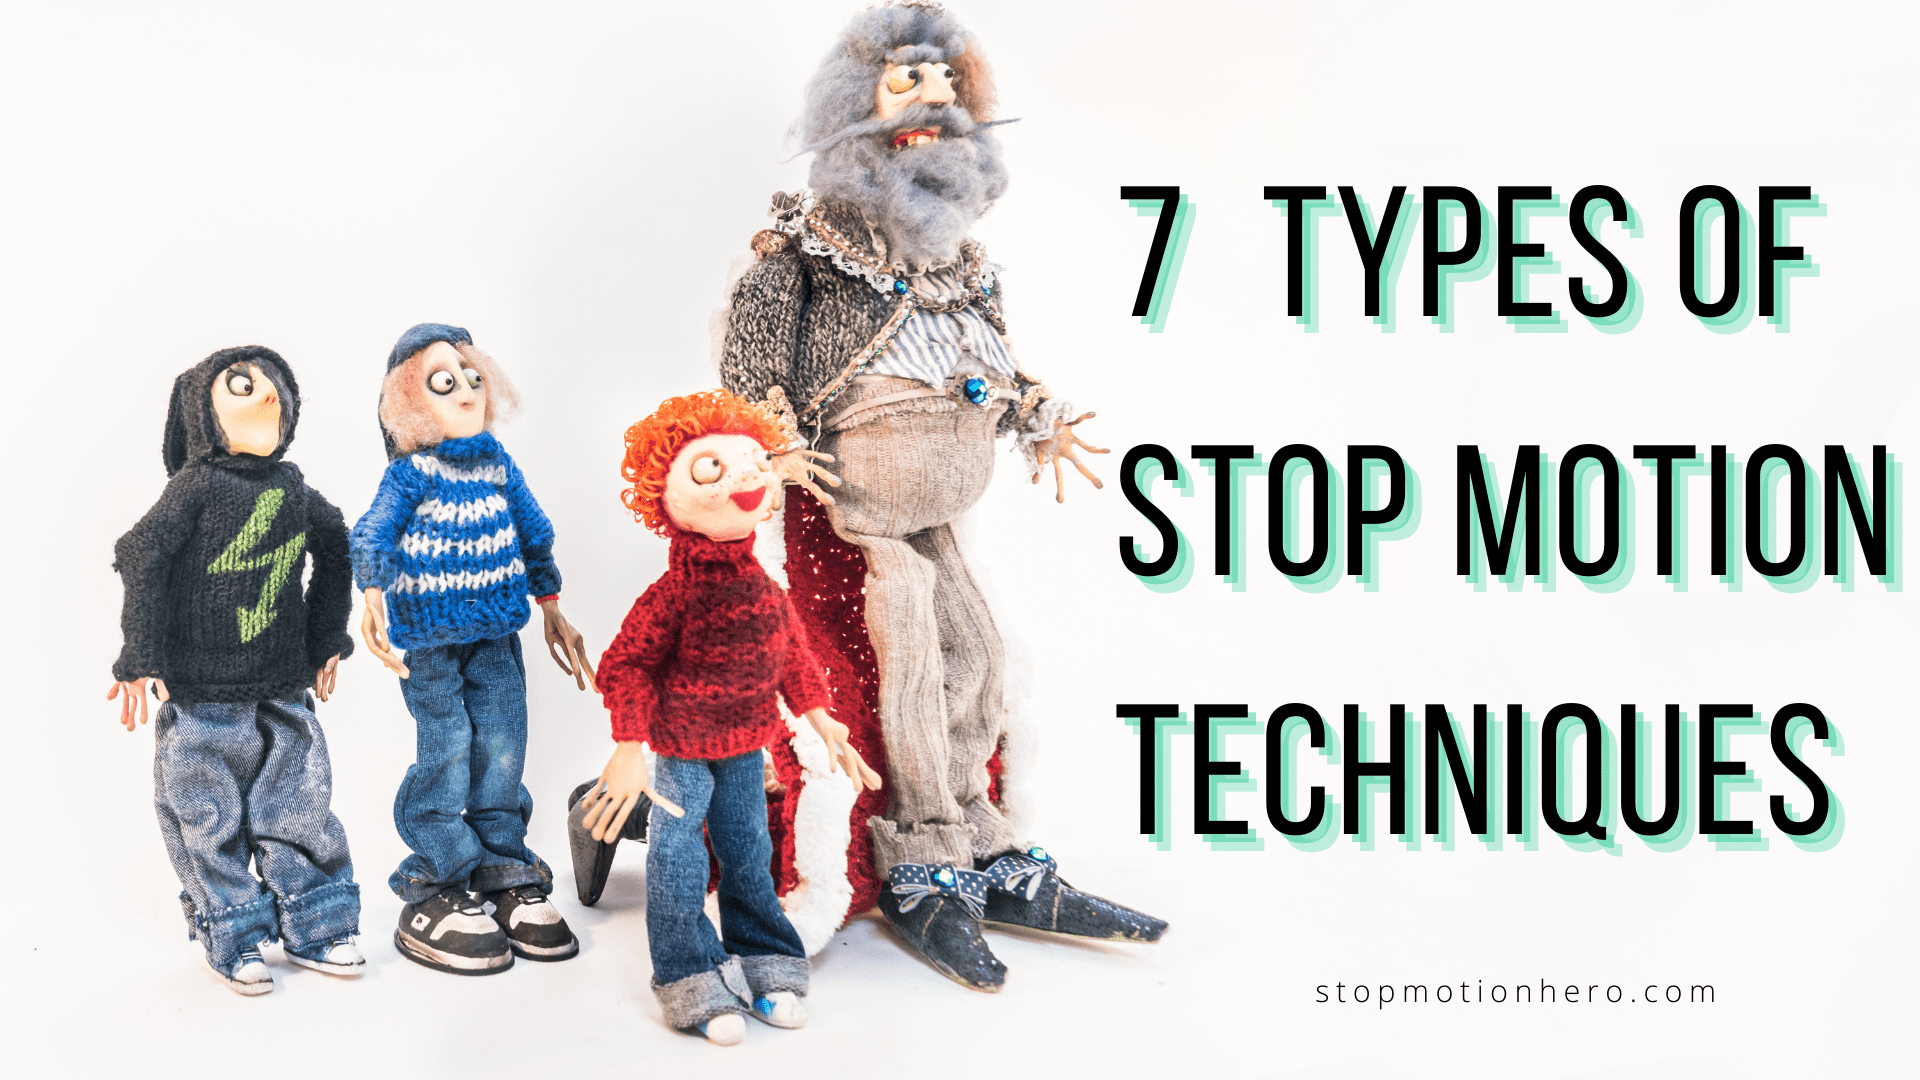 What are the 7 types of stop motion? Common techniques explained